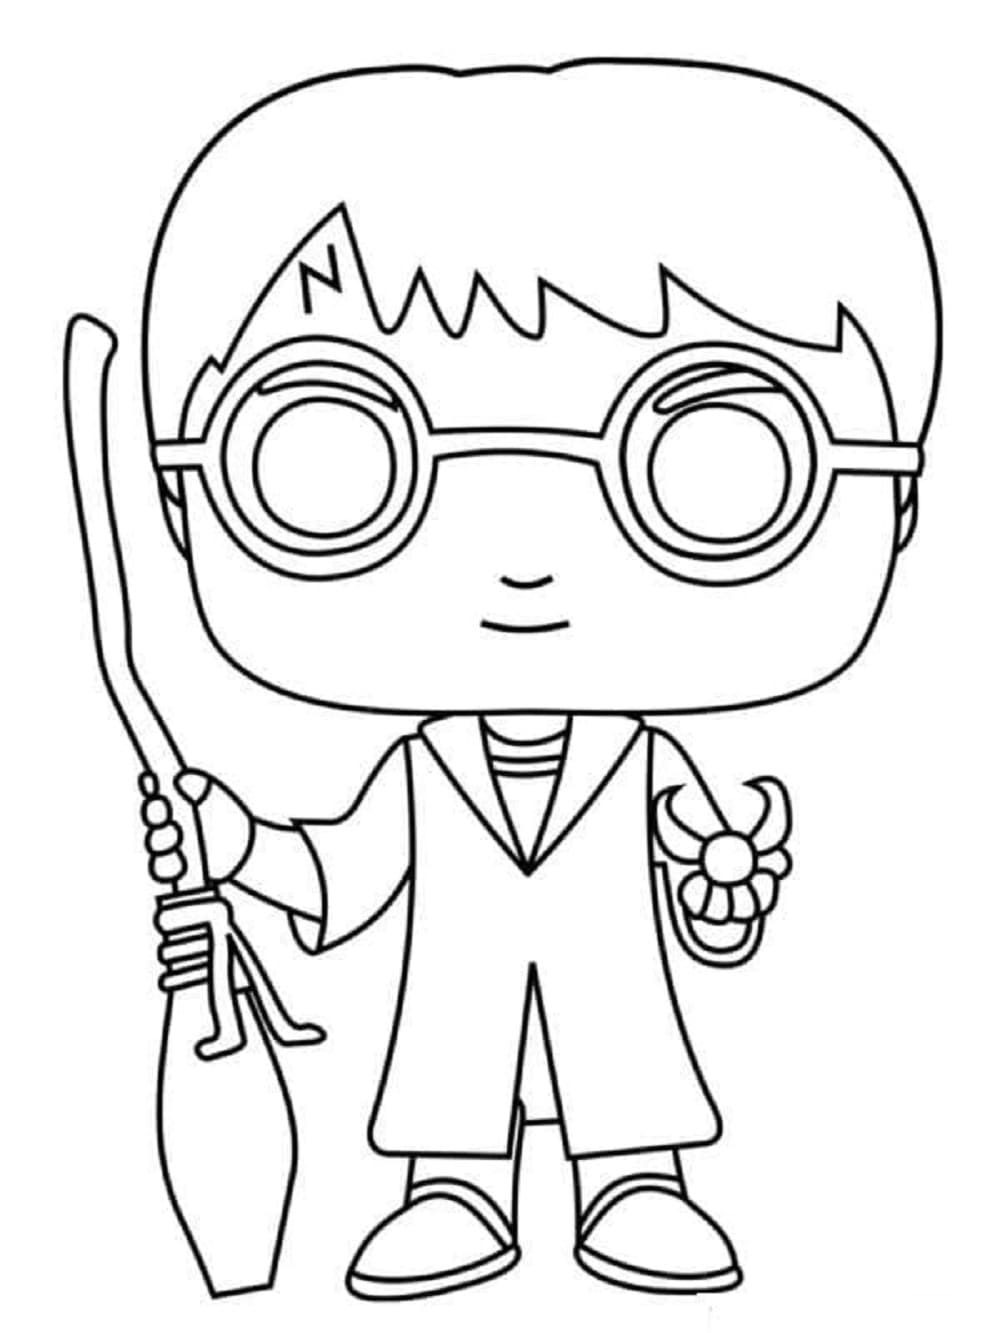 Printable Funko Pop Harry Potter Coloring Page